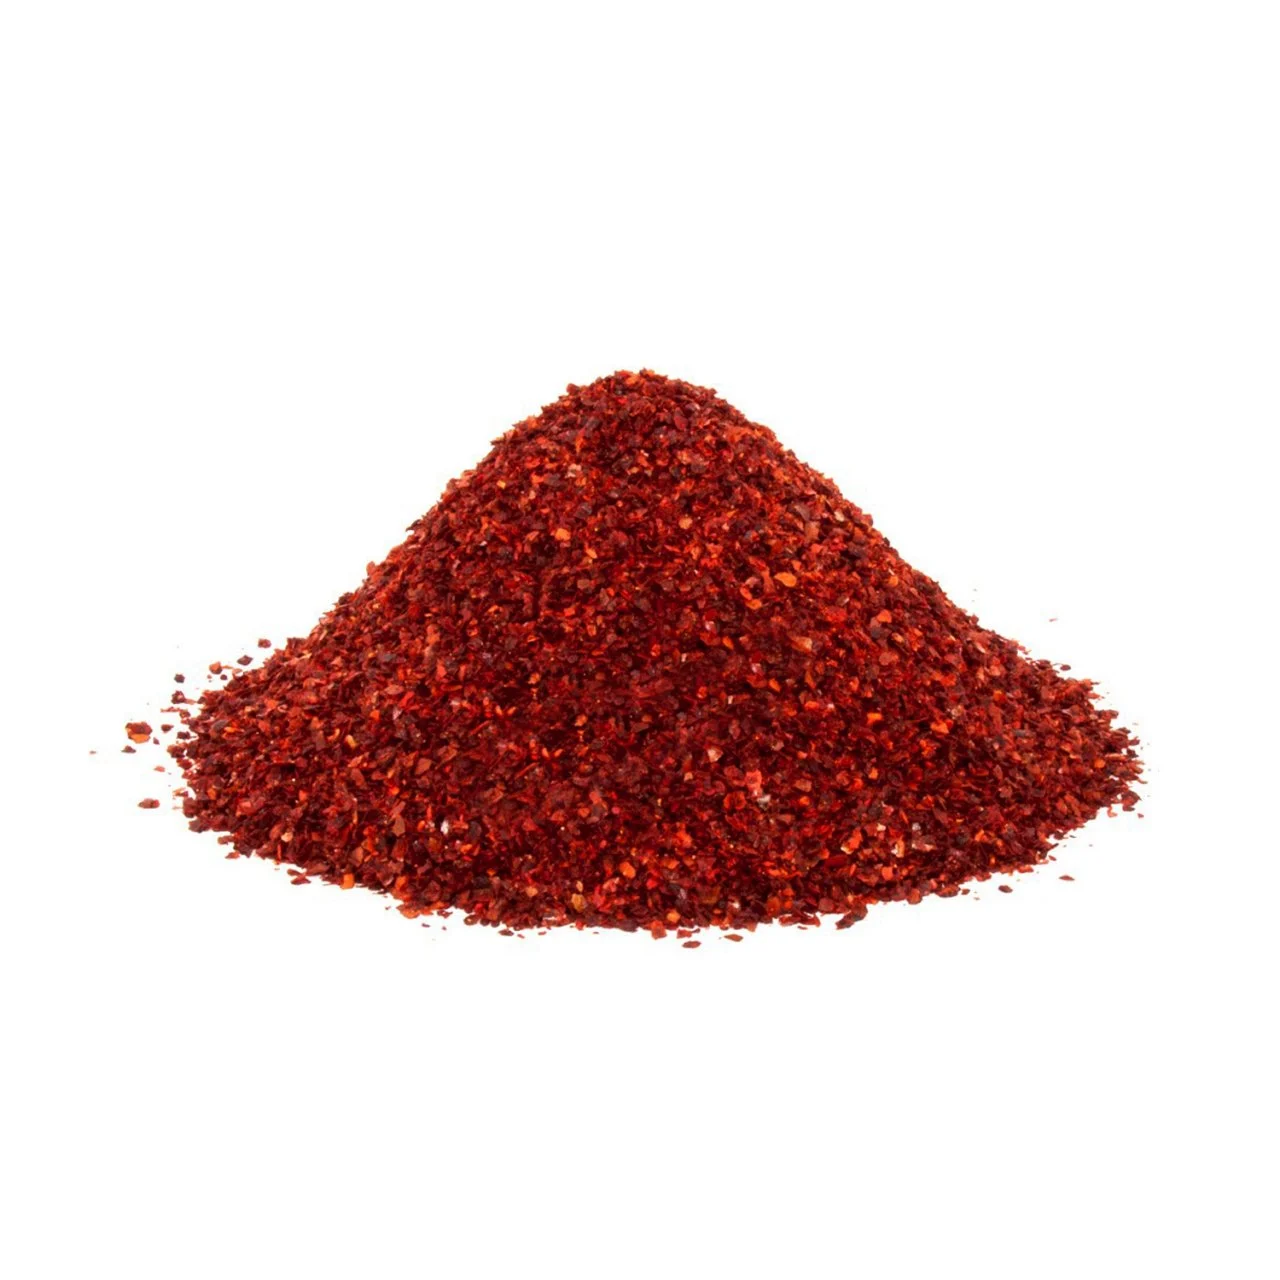  - Turkish Red Pepper Flakes Sweet